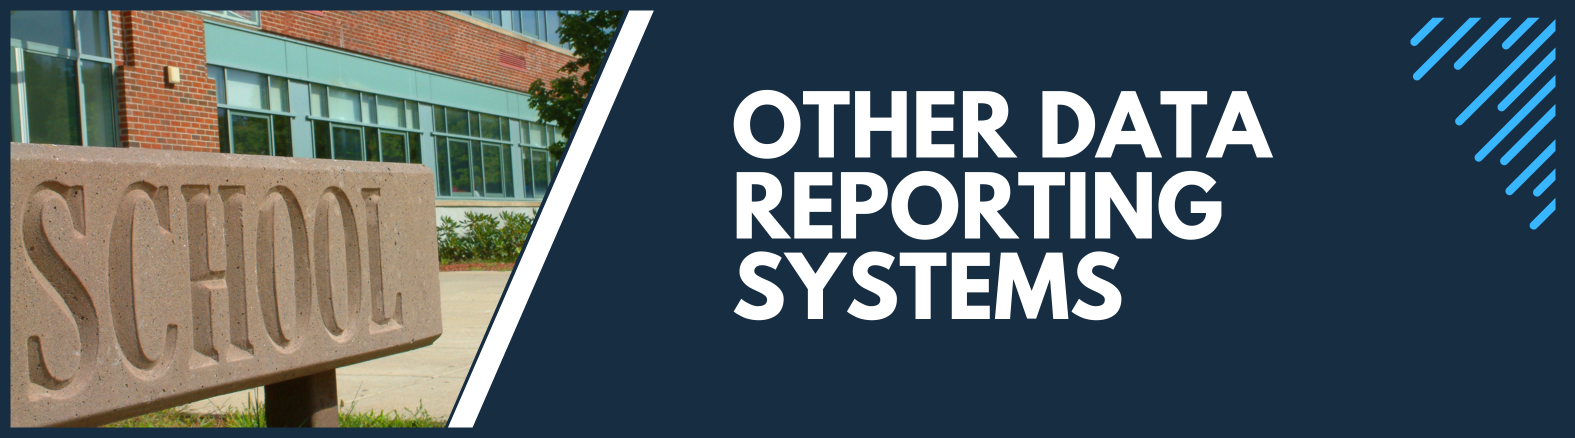 Other Data Reporting Banner